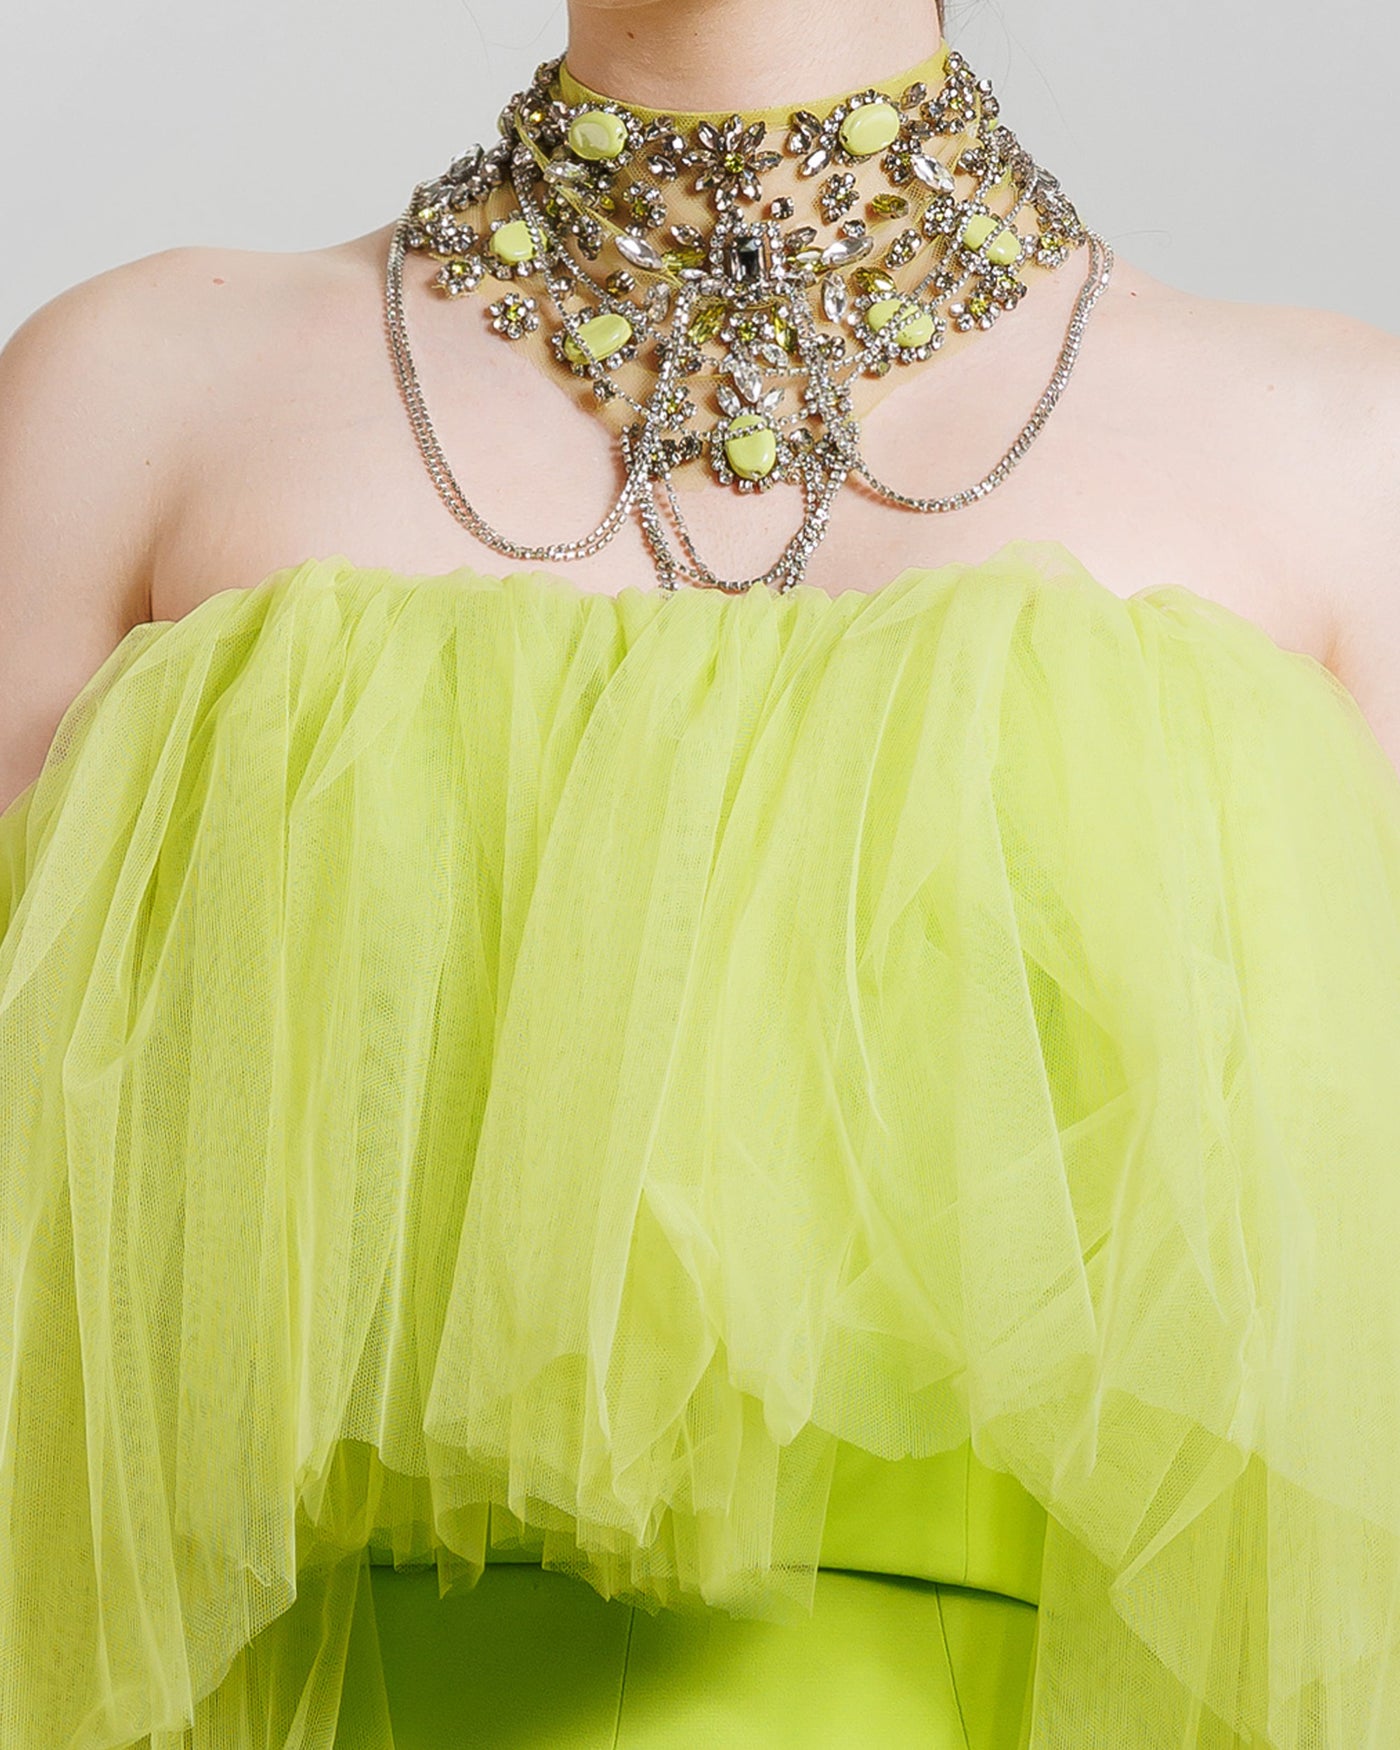 A close-up of an evening look in lime color featuring an off-the-shoulders tulle top. The look is completed with a matching beaded collar necklace.